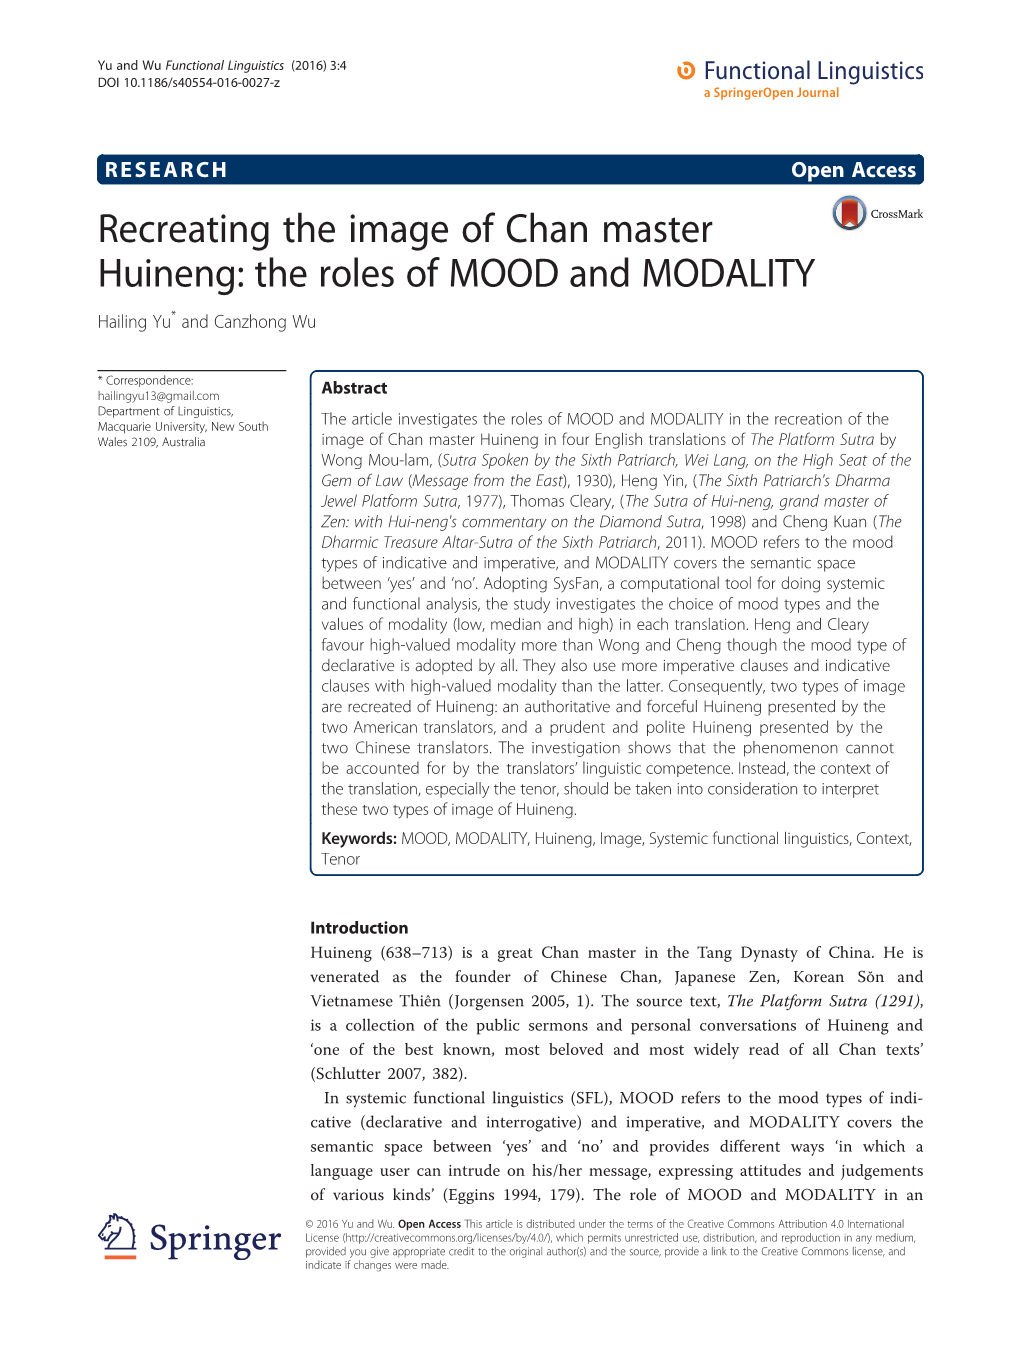 Recreating the Image of Chan Master Huineng: the Roles of MOOD and MODALITY Hailing Yu* and Canzhong Wu